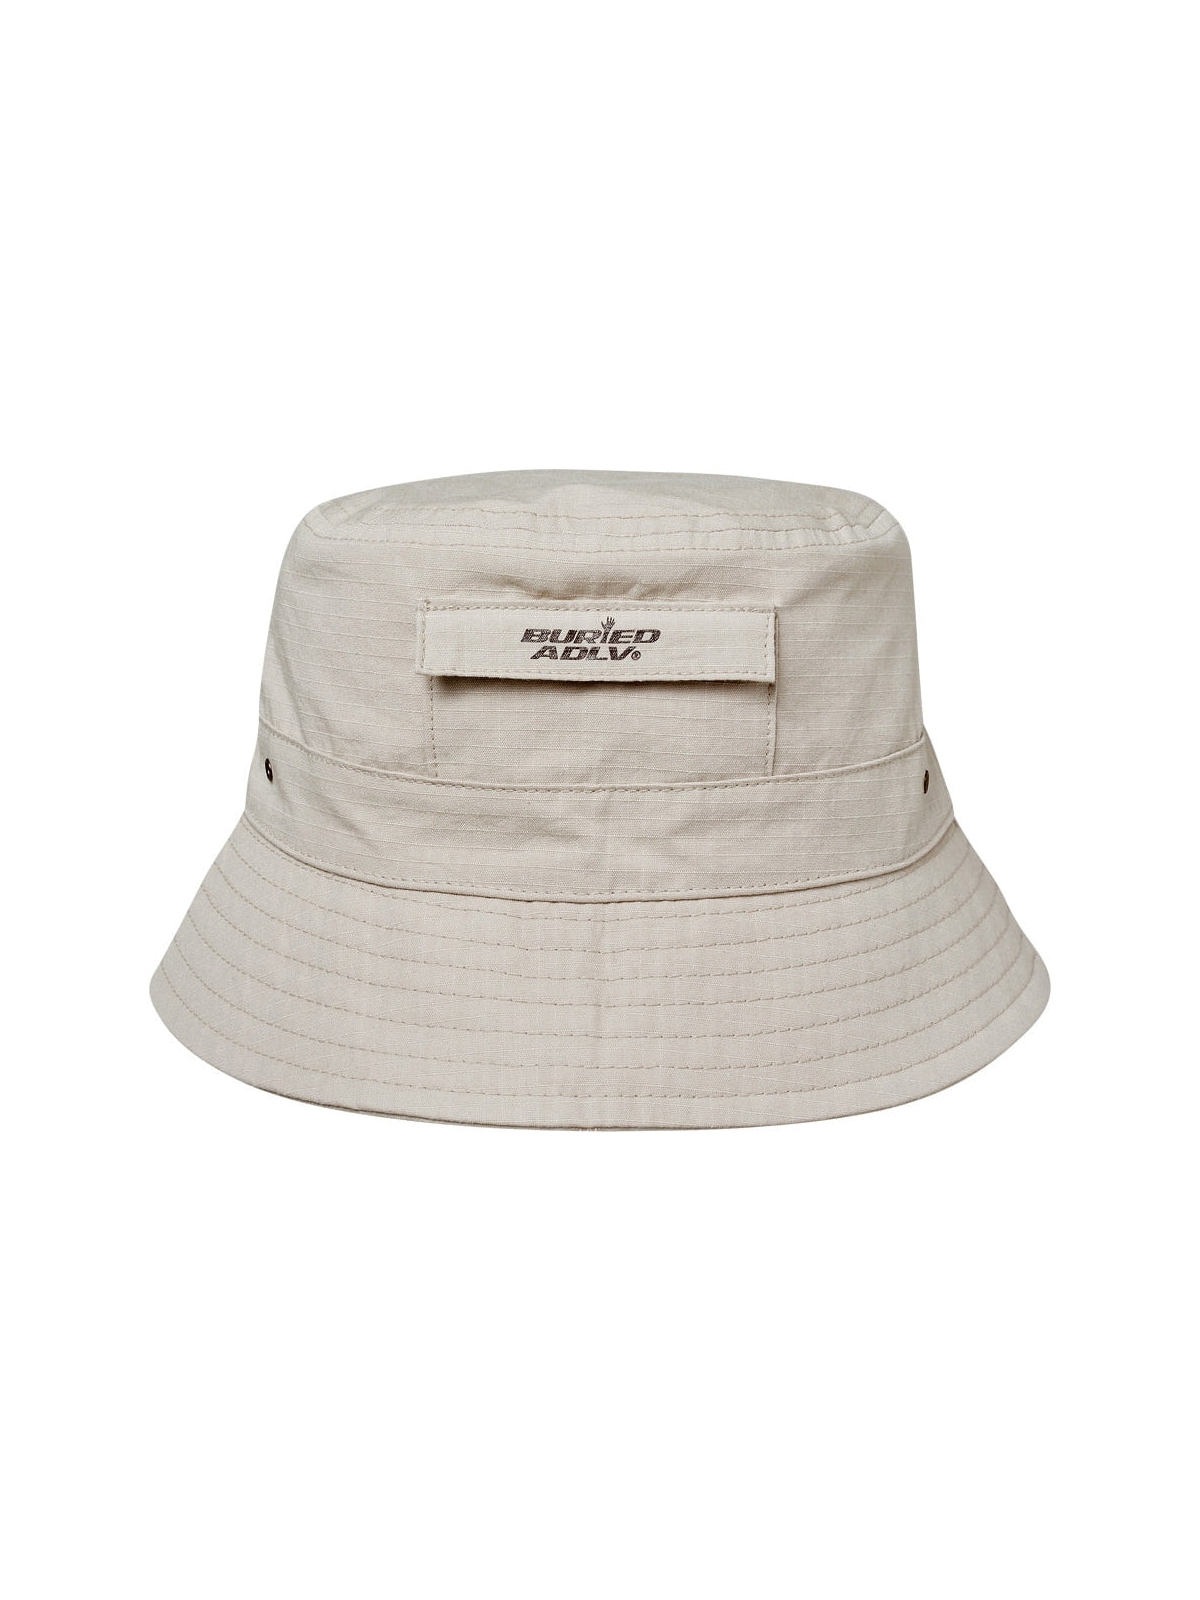 ADLV x BA Out Pocket Bucket Hat Beige – WORMHOLE STORE